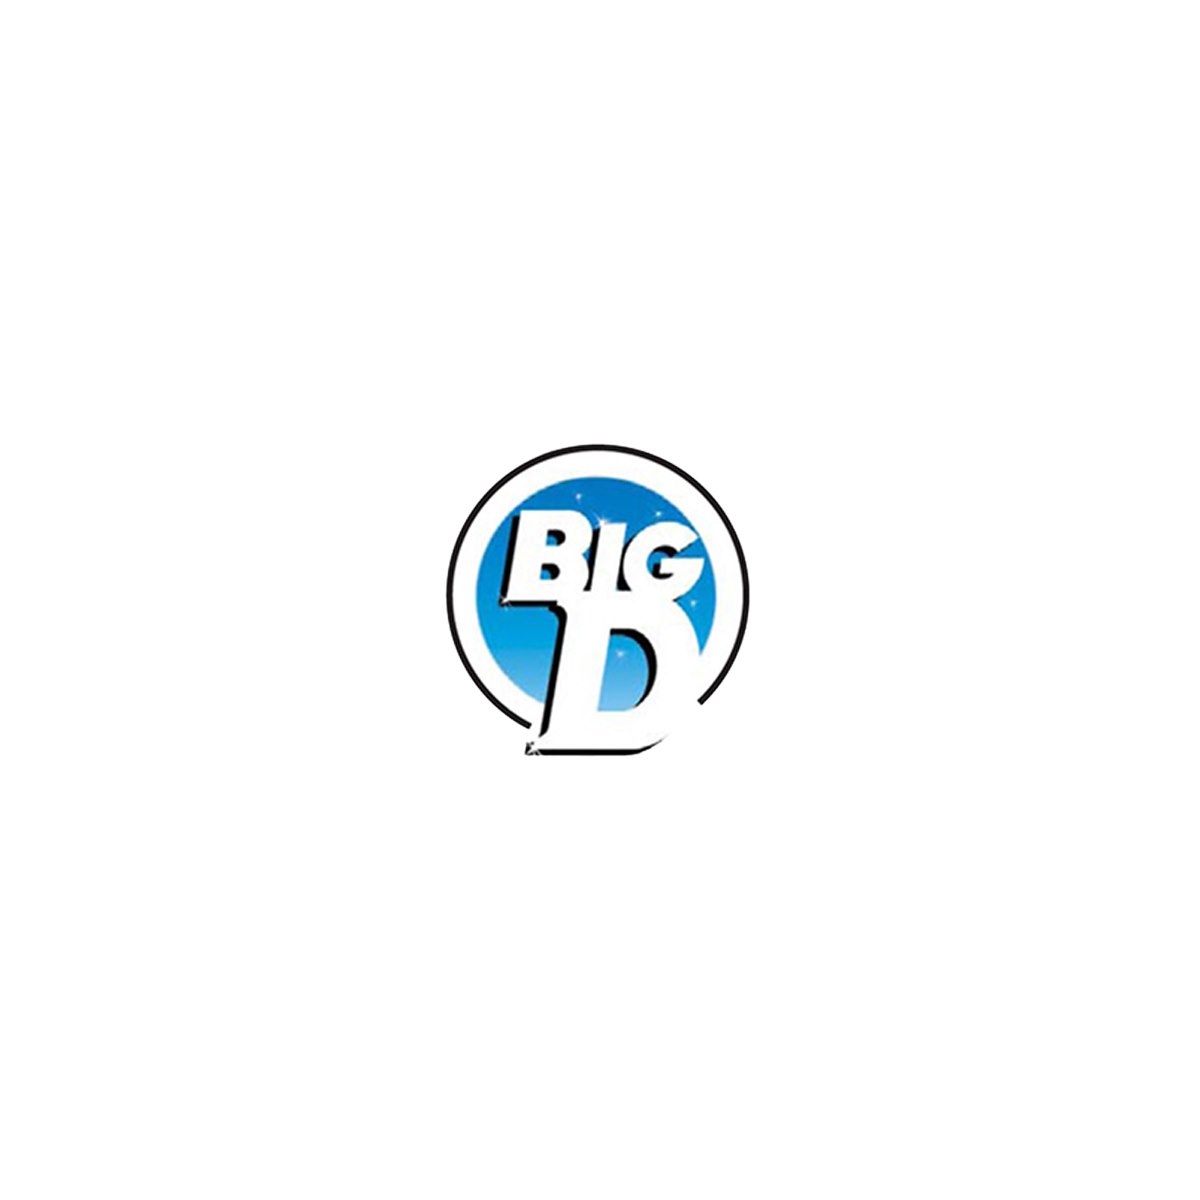 Where to buy Big D Products?